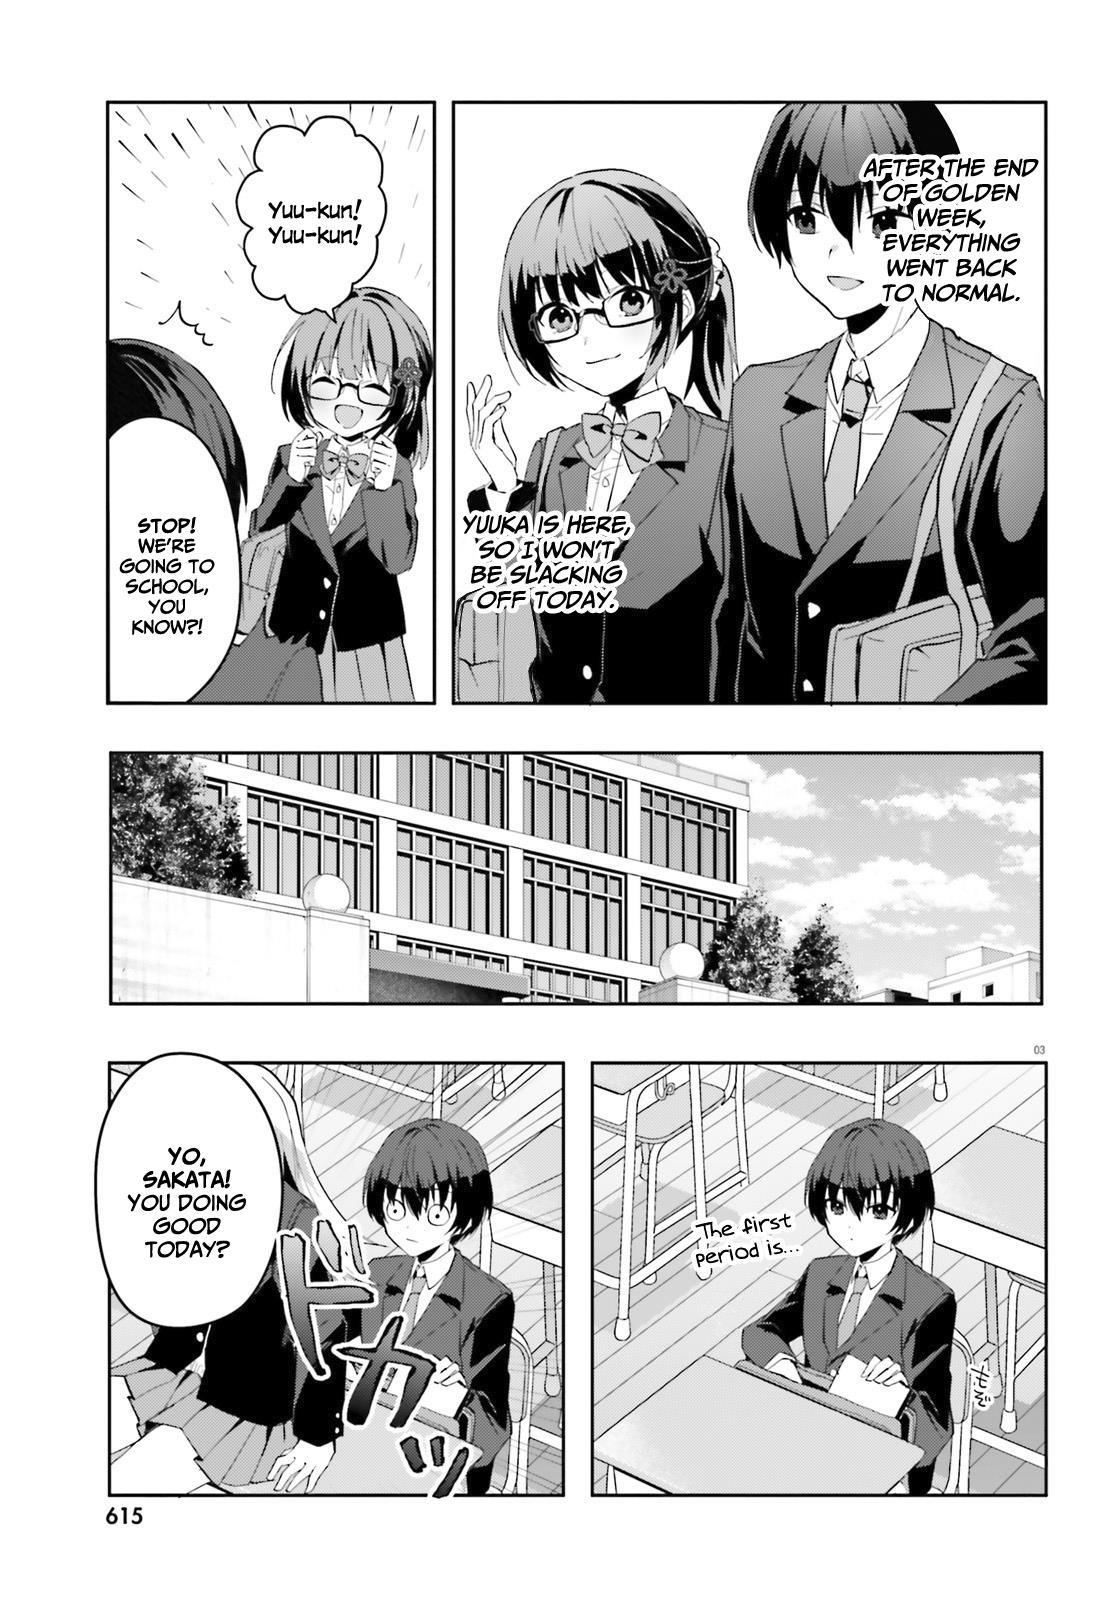 The Plain-Looking Girl, Who Became My Fiancée, Is Only Cute At Home - chapter 9 - #4